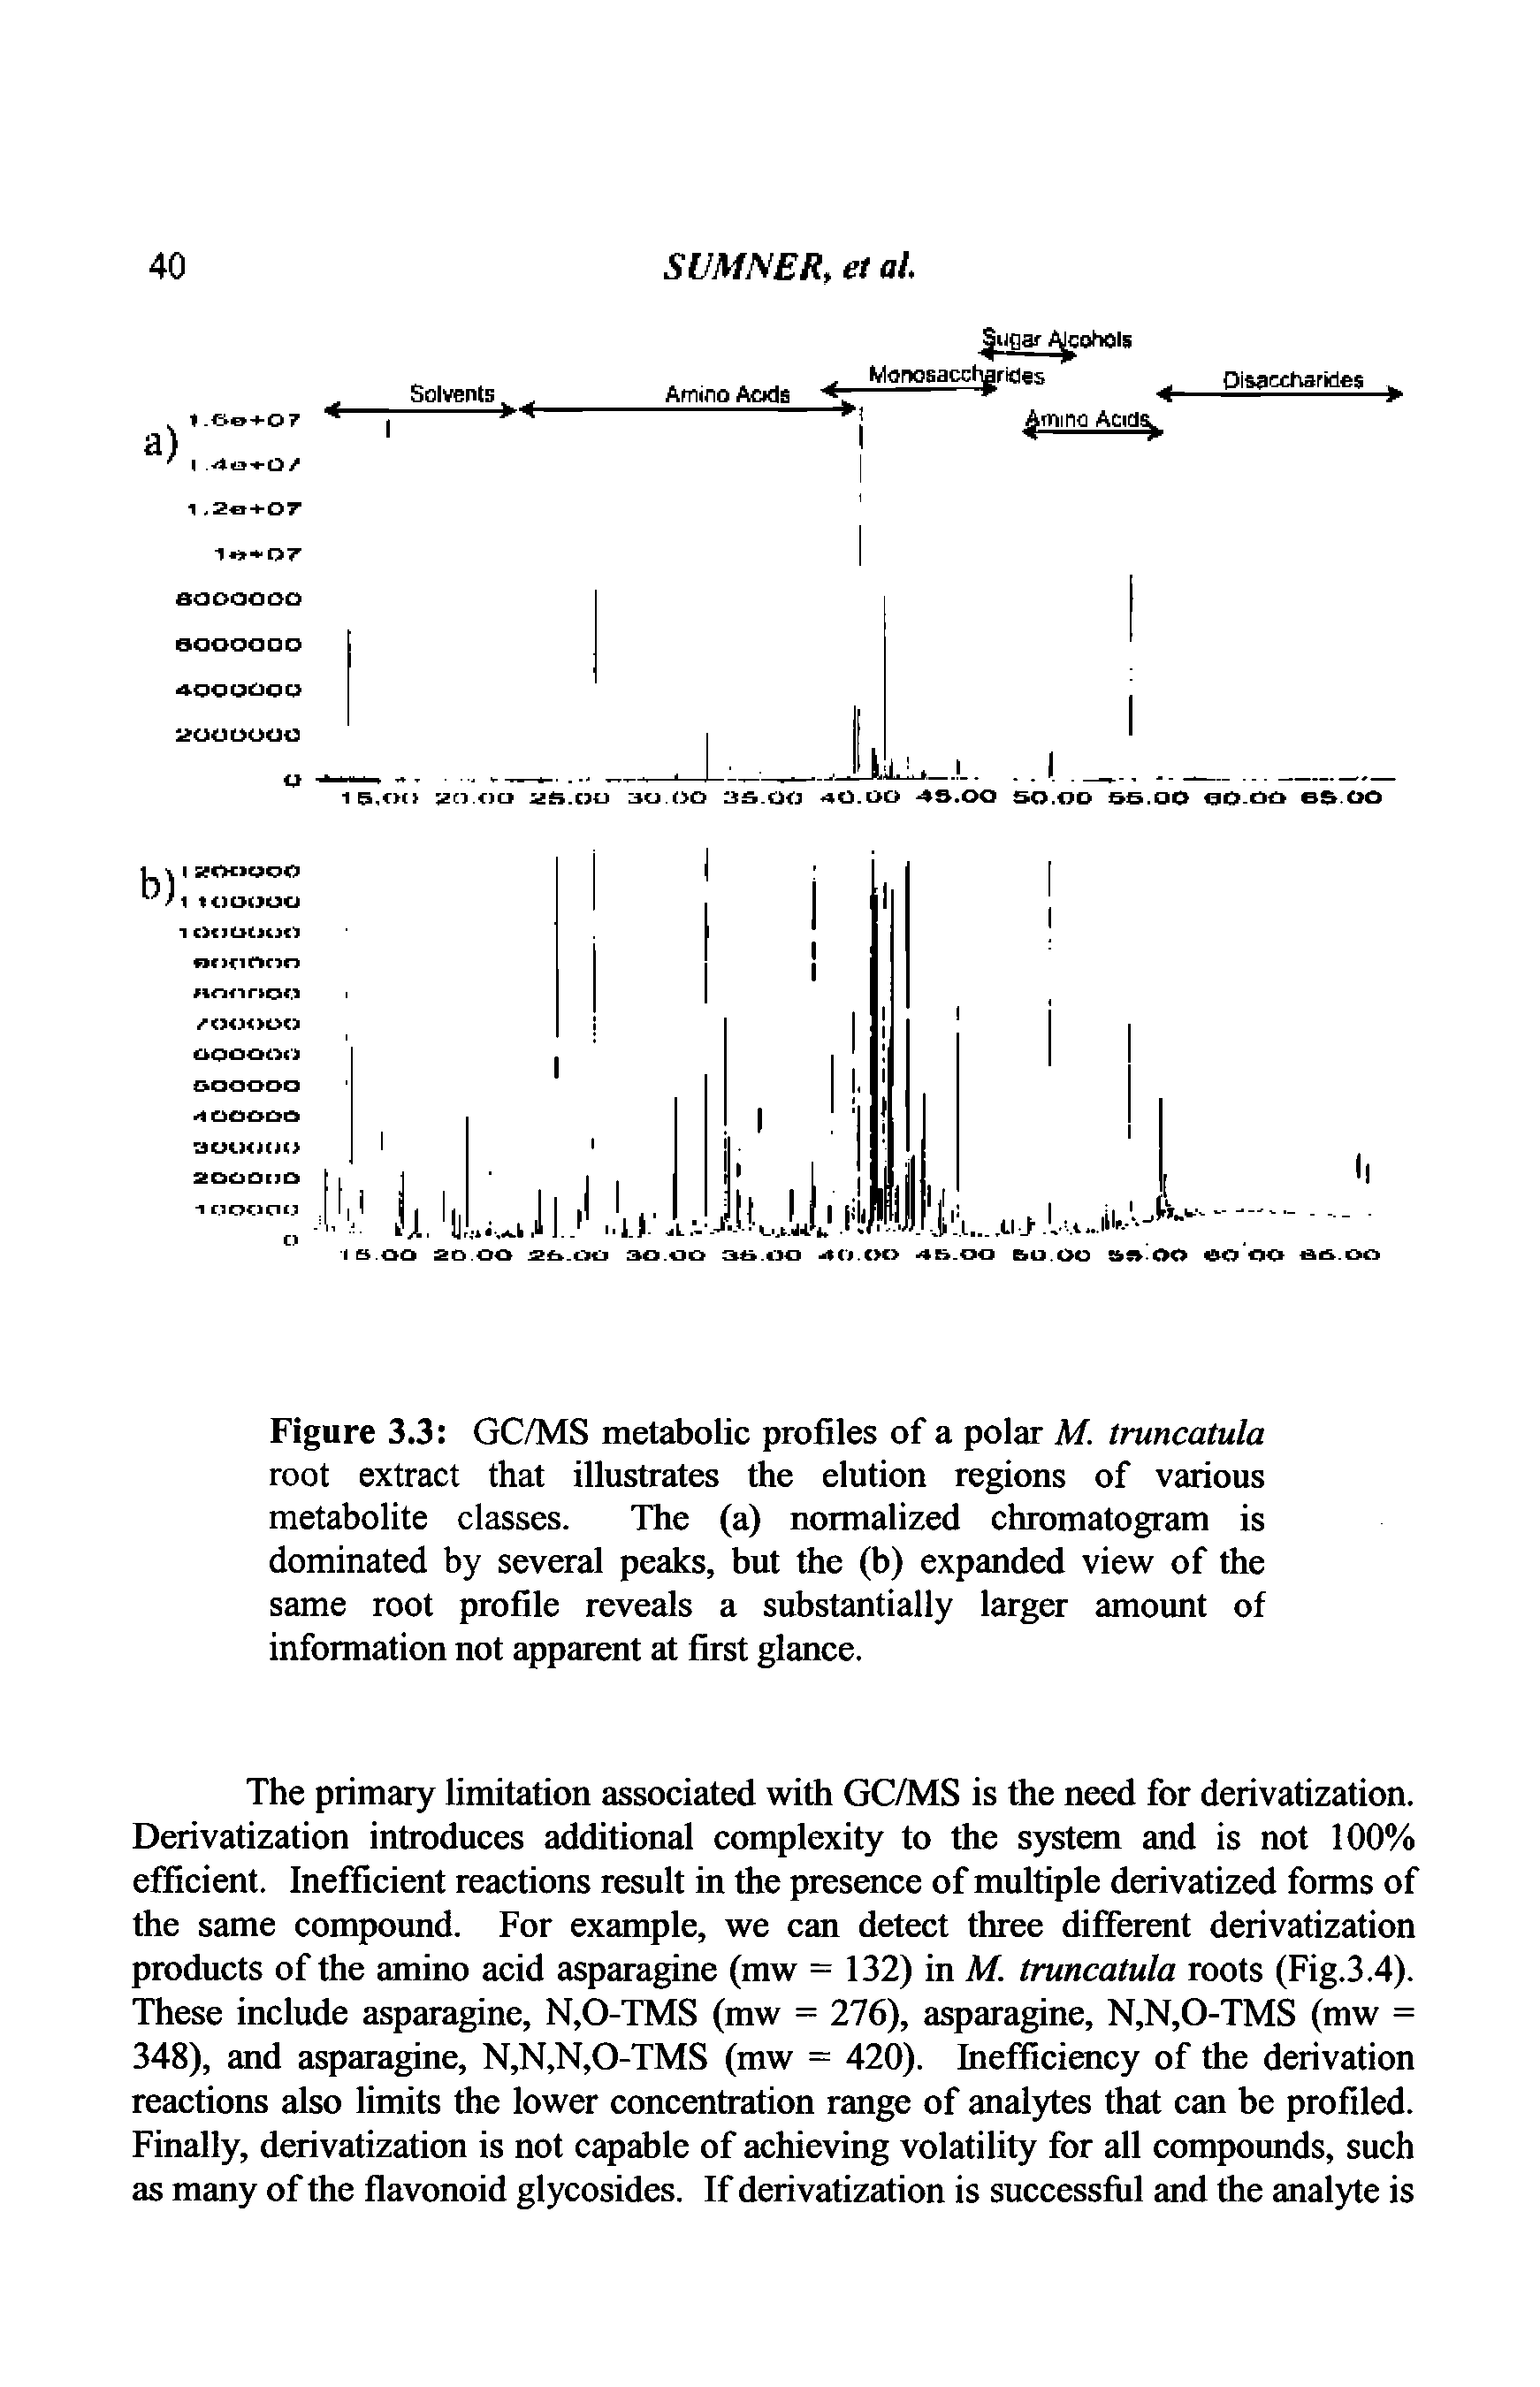 Figure 3.3 GC/MS metabolic profiles of a polar M. truncatula root extract that illustrates the elution regions of various metabolite classes. The (a) normalized chromatogram is dominated by several peaks, but the (b) expanded view of the same root profile reveals a substantially larger amount of information not apparent at first glance.